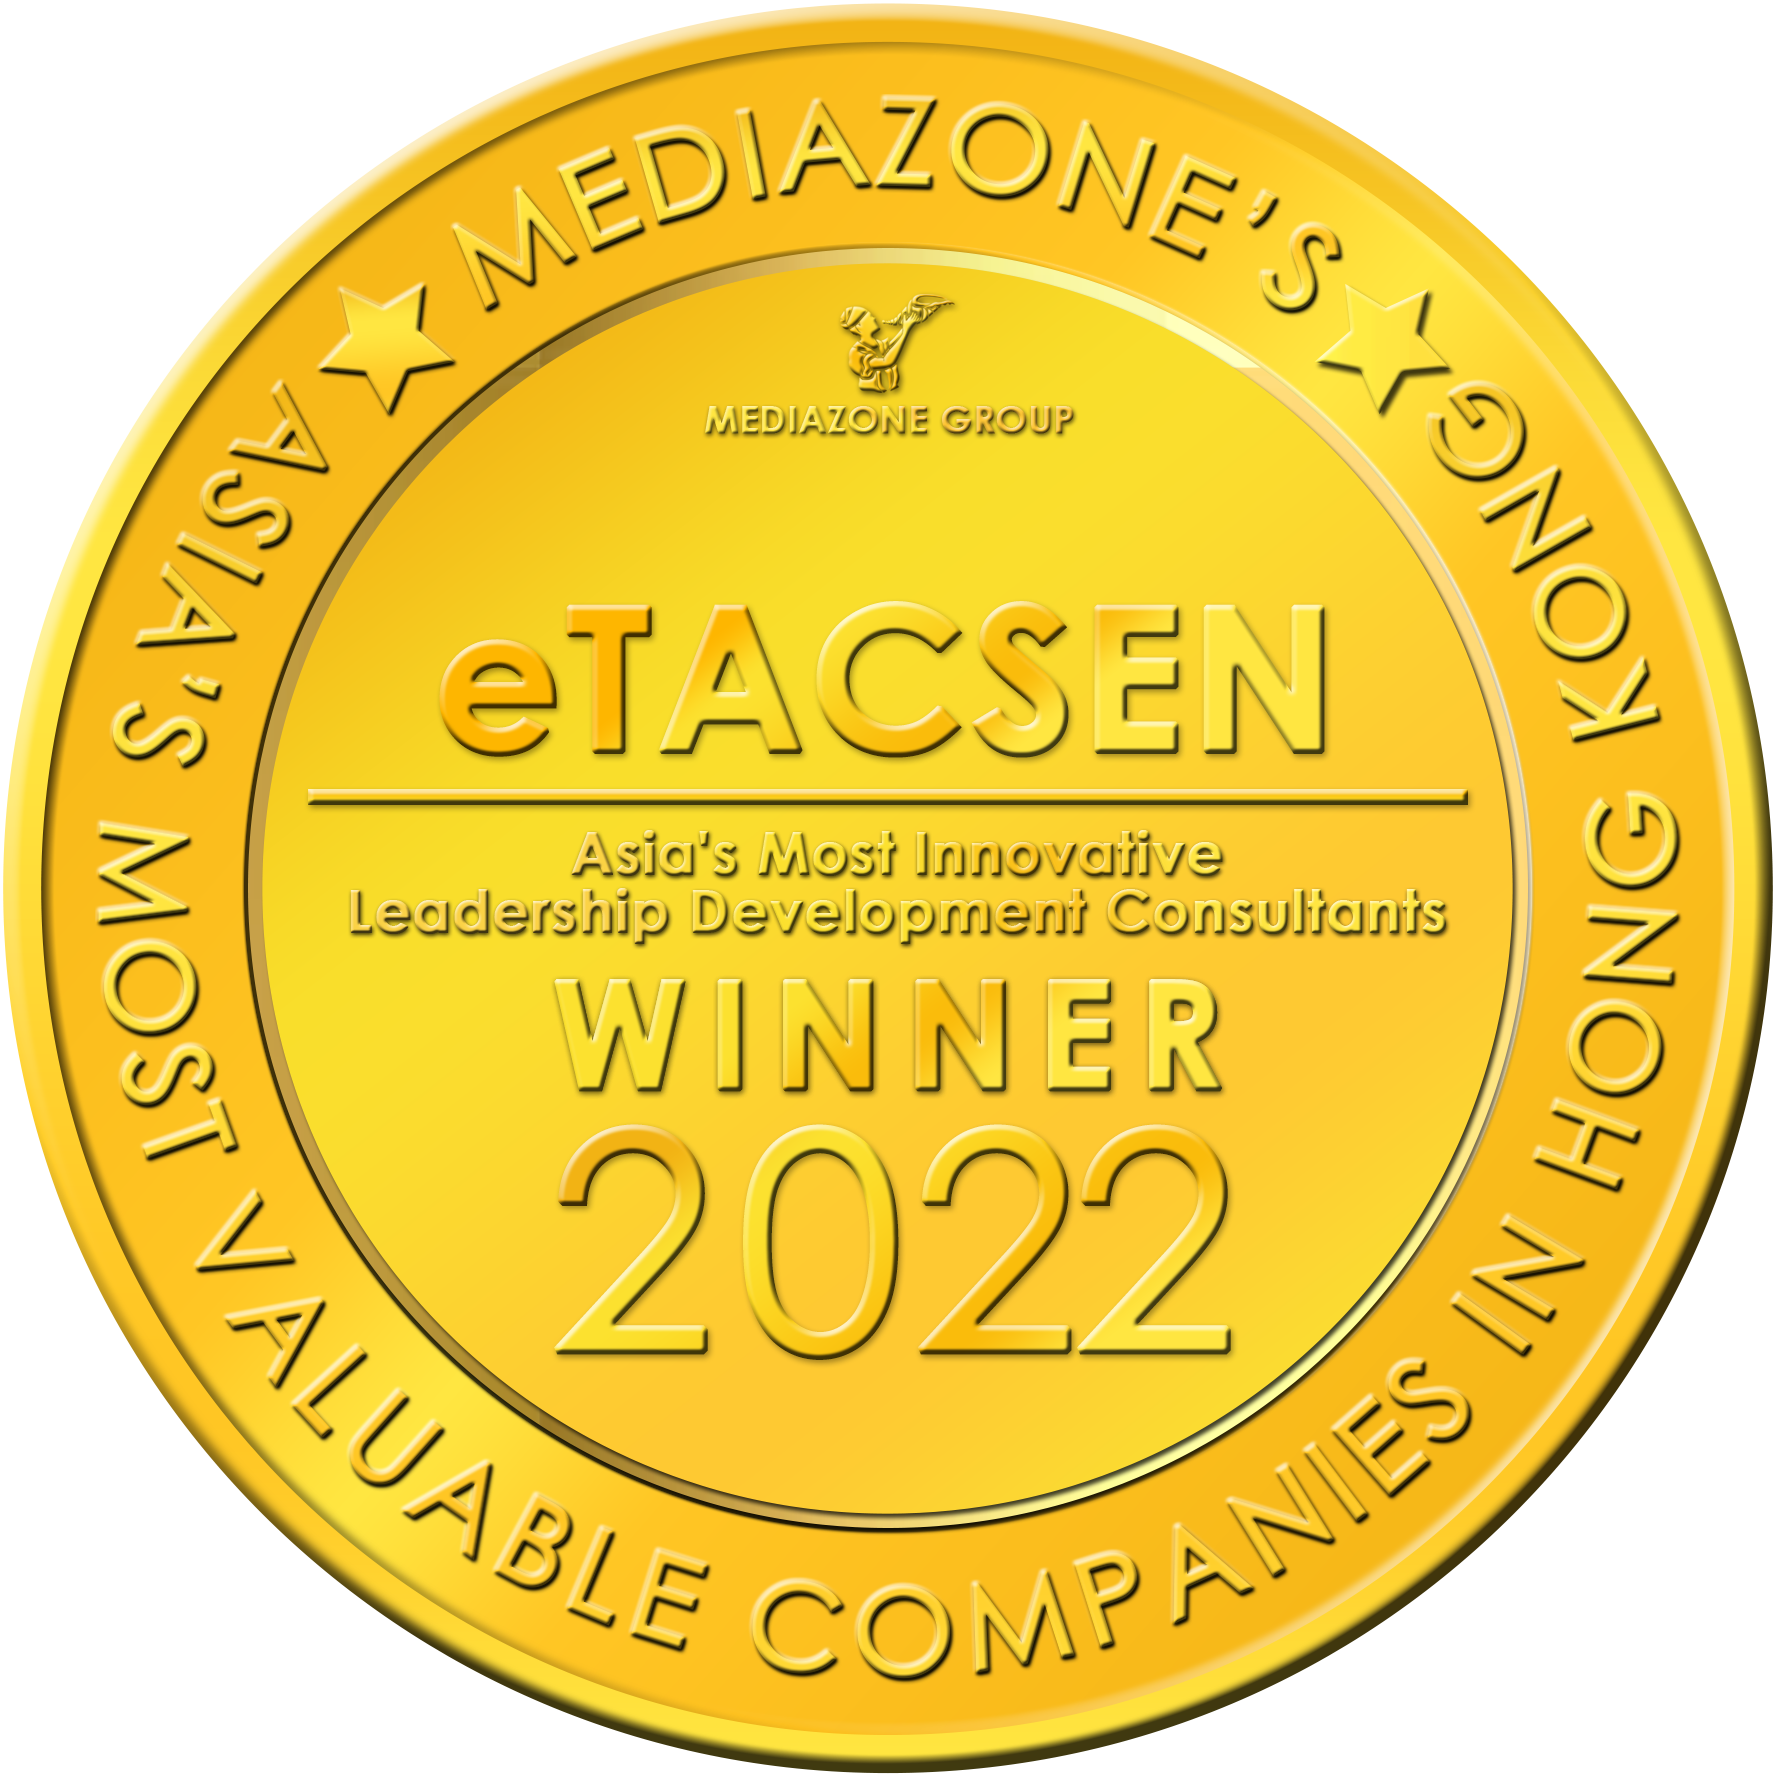 eTACSEN receives award as Asia’s Most Innovative Leadership Development Consultant in 2022